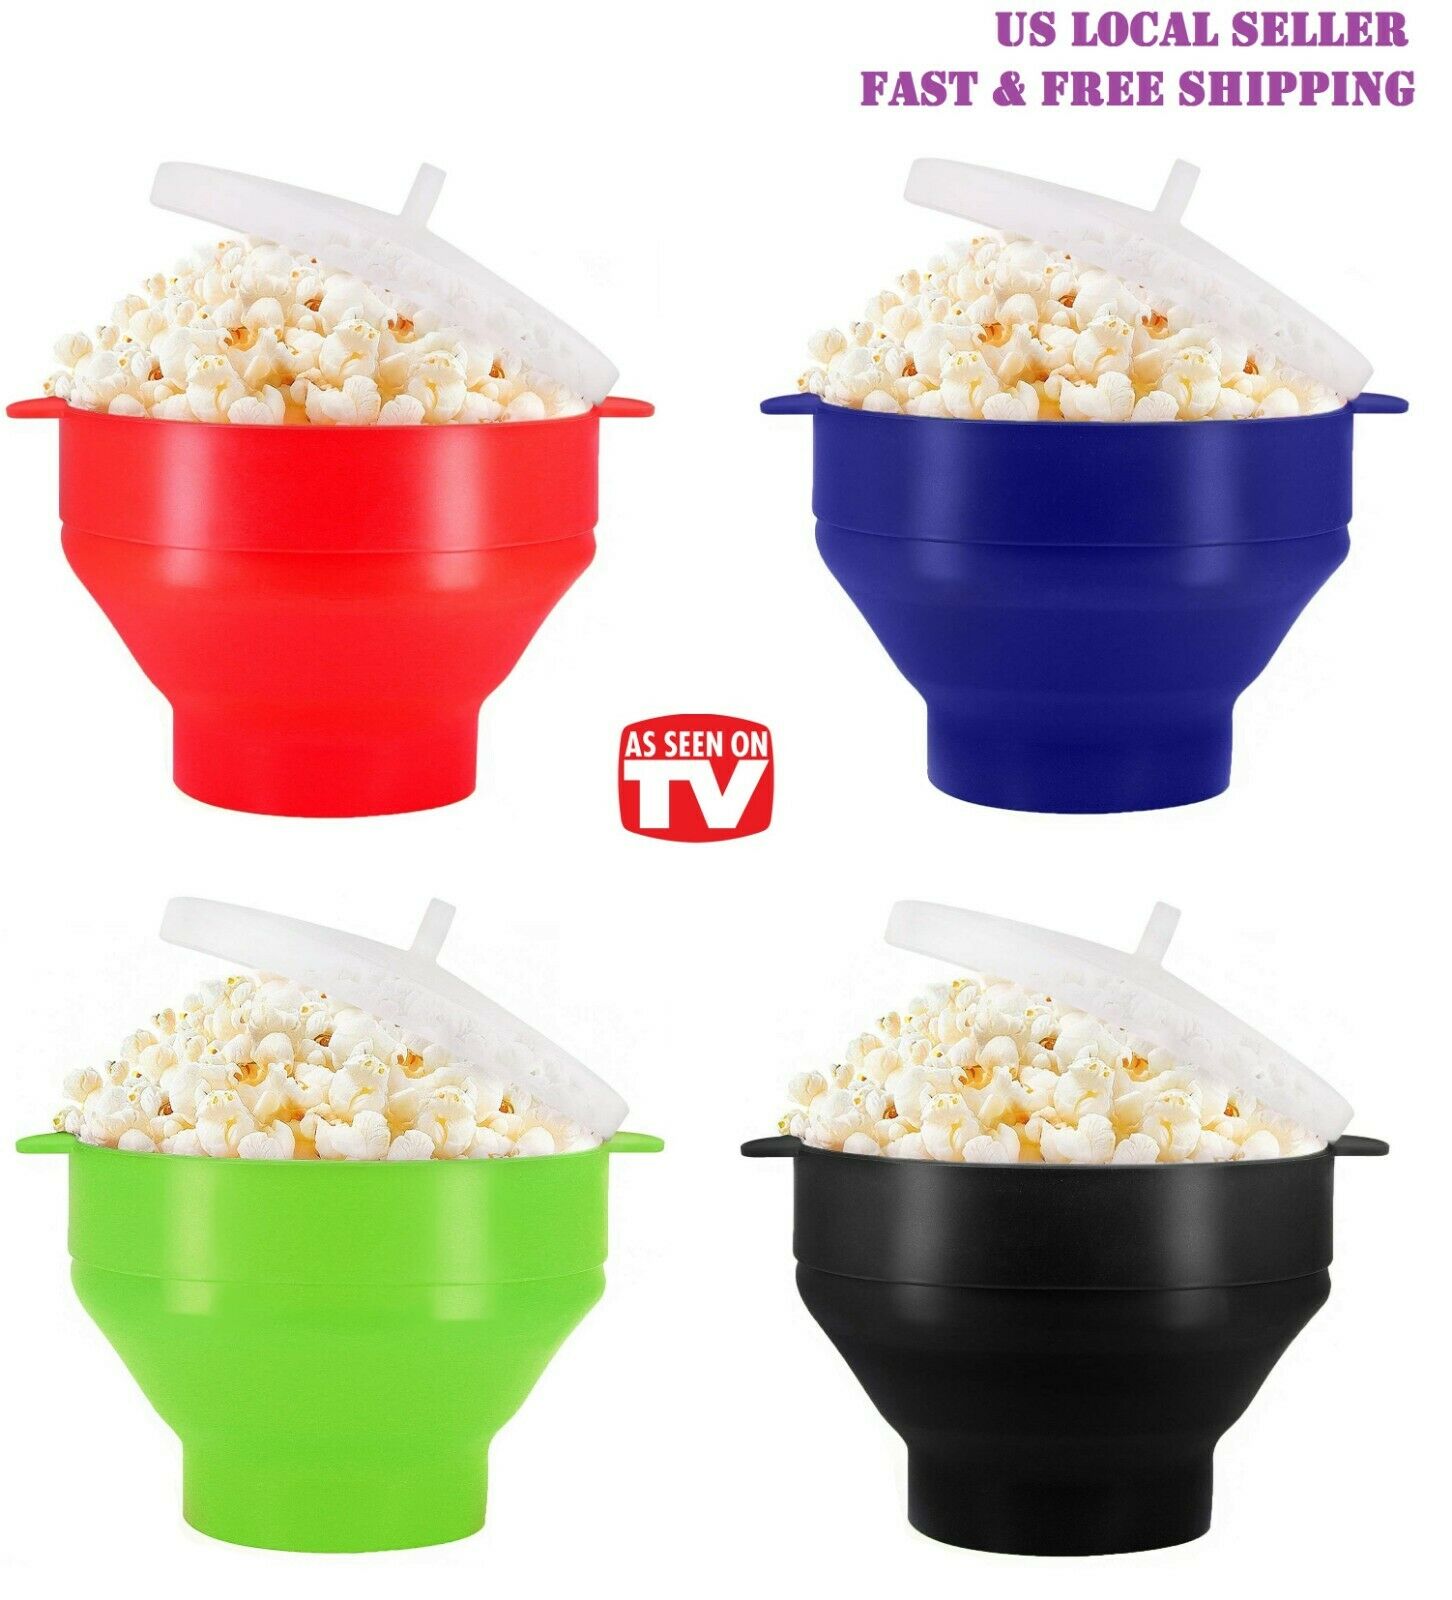 Microwave Oven Silicone Popcorn Popper Maker Bowl Collapsible Bpa Free Healthy